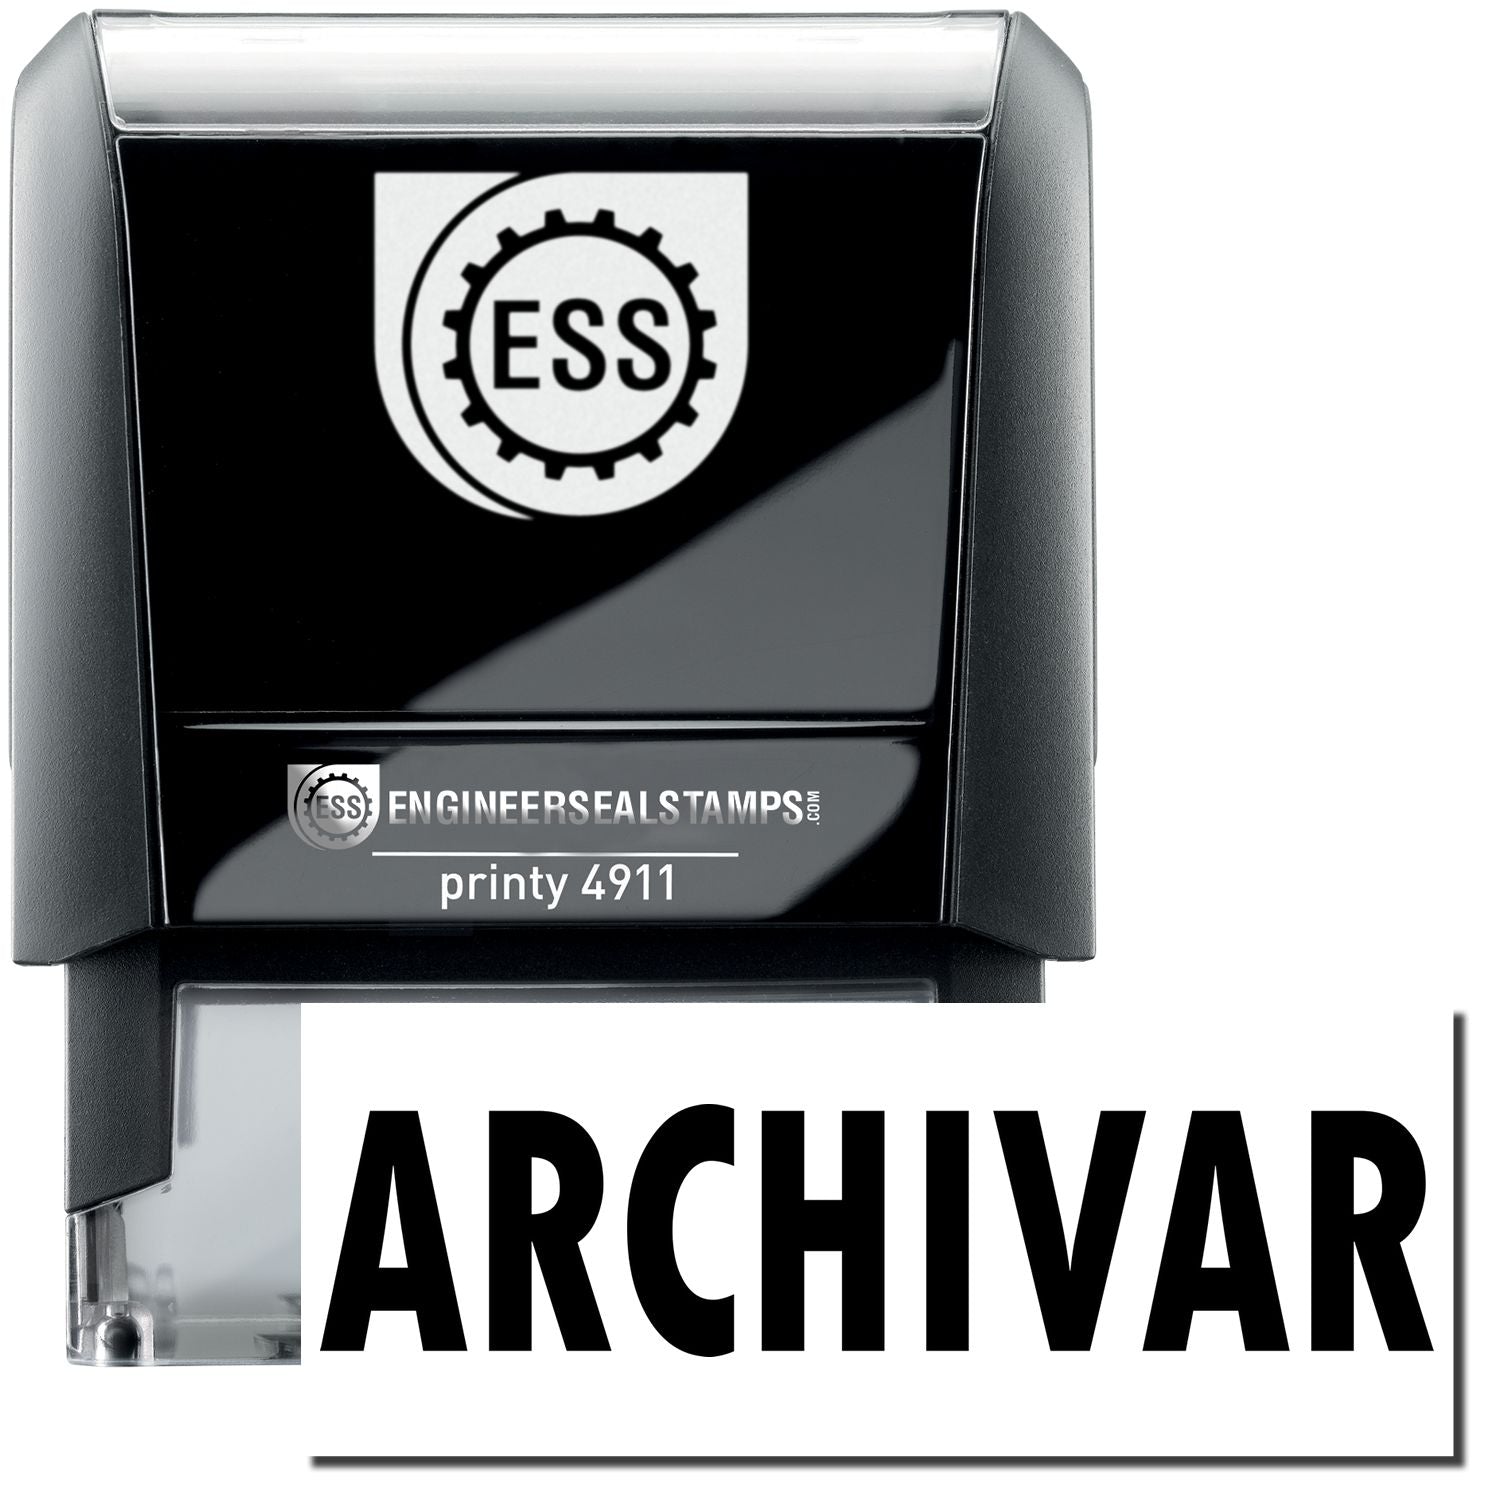 A self-inking stamp with a stamped image showing how the text "ARCHIVAR" is displayed after stamping.